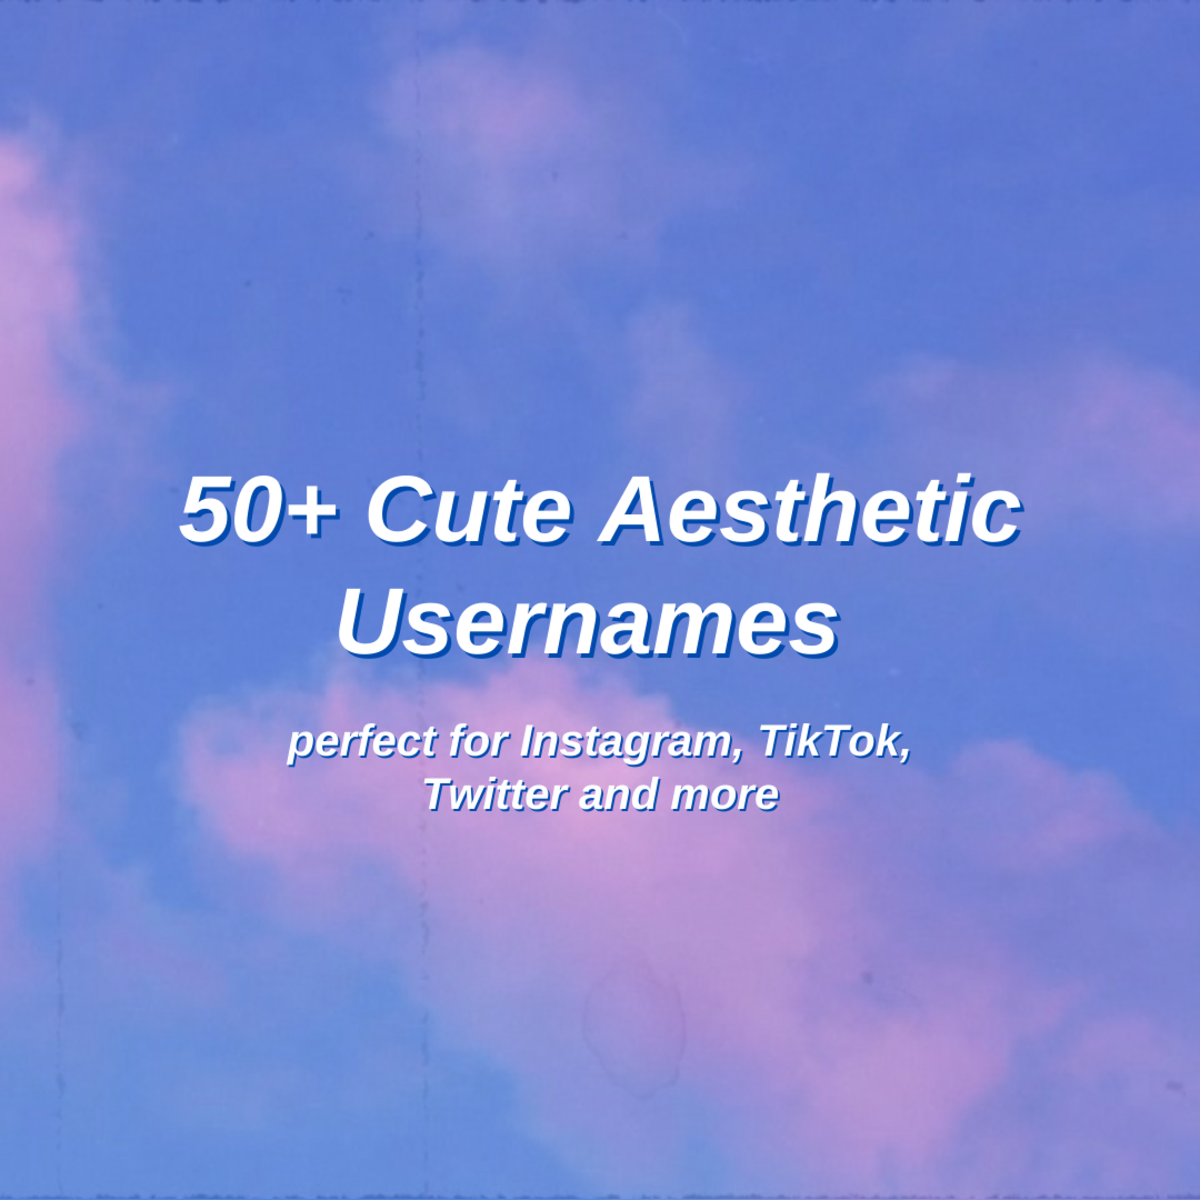 Discover over 50 cute aesthetic usernames in this list!